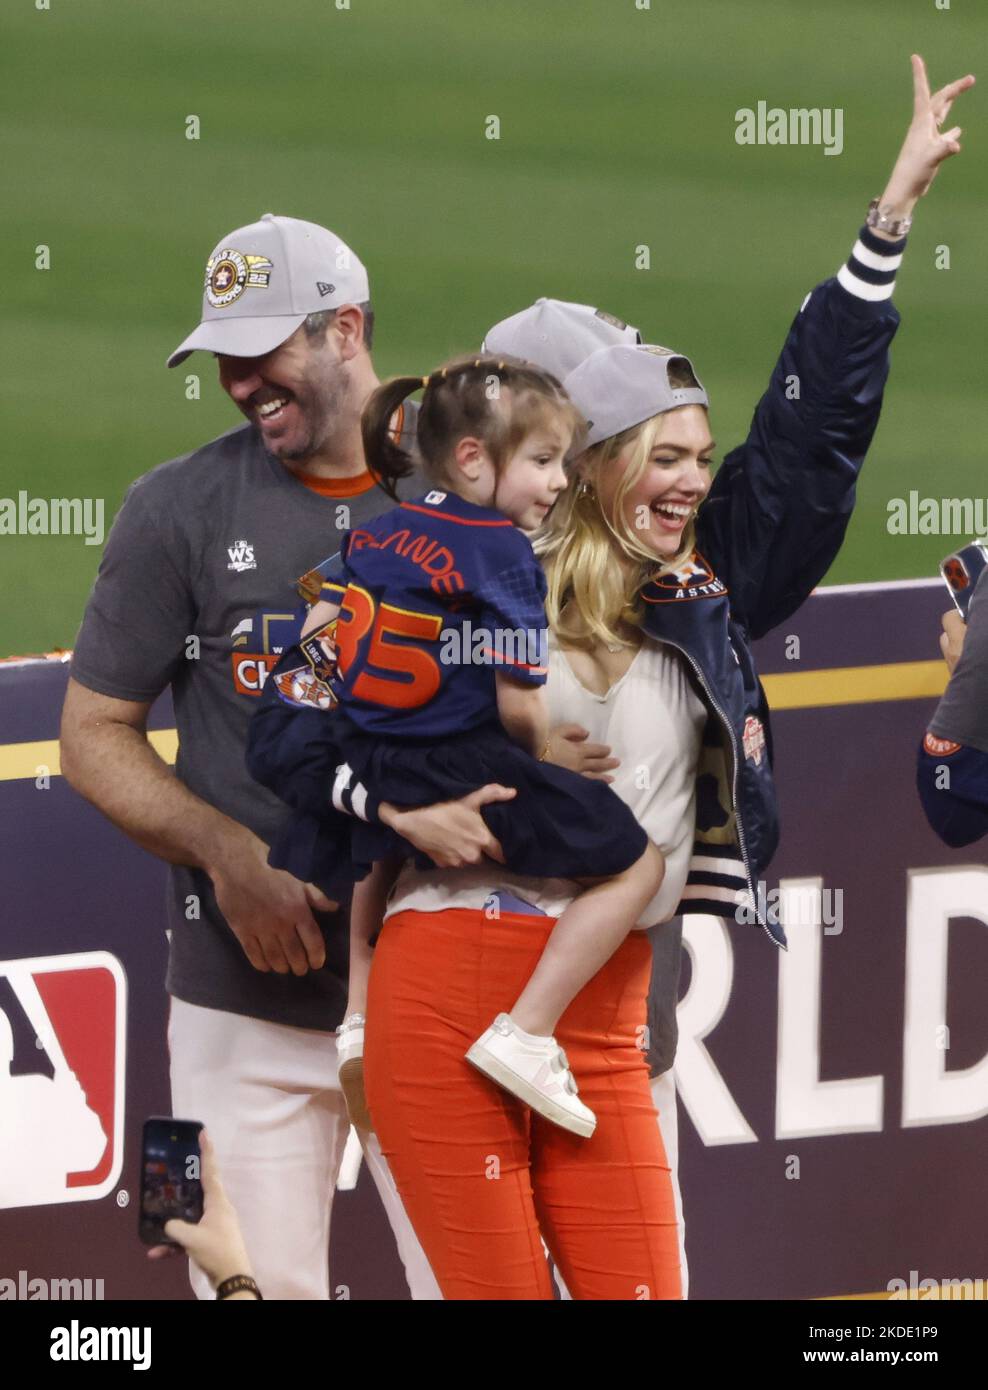 Verlander world series hi-res stock photography and images - Alamy